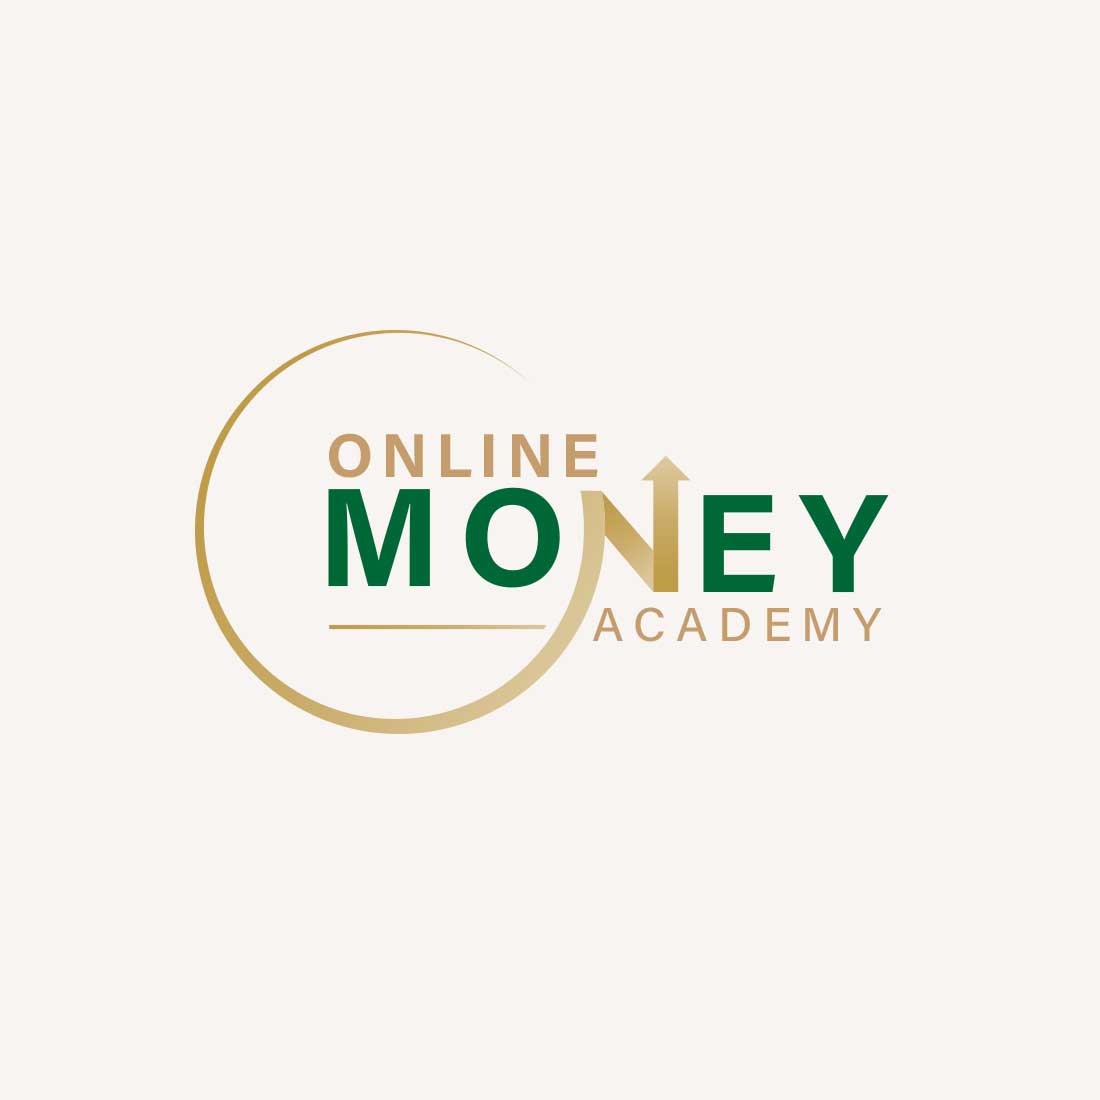 Online money logo and more.